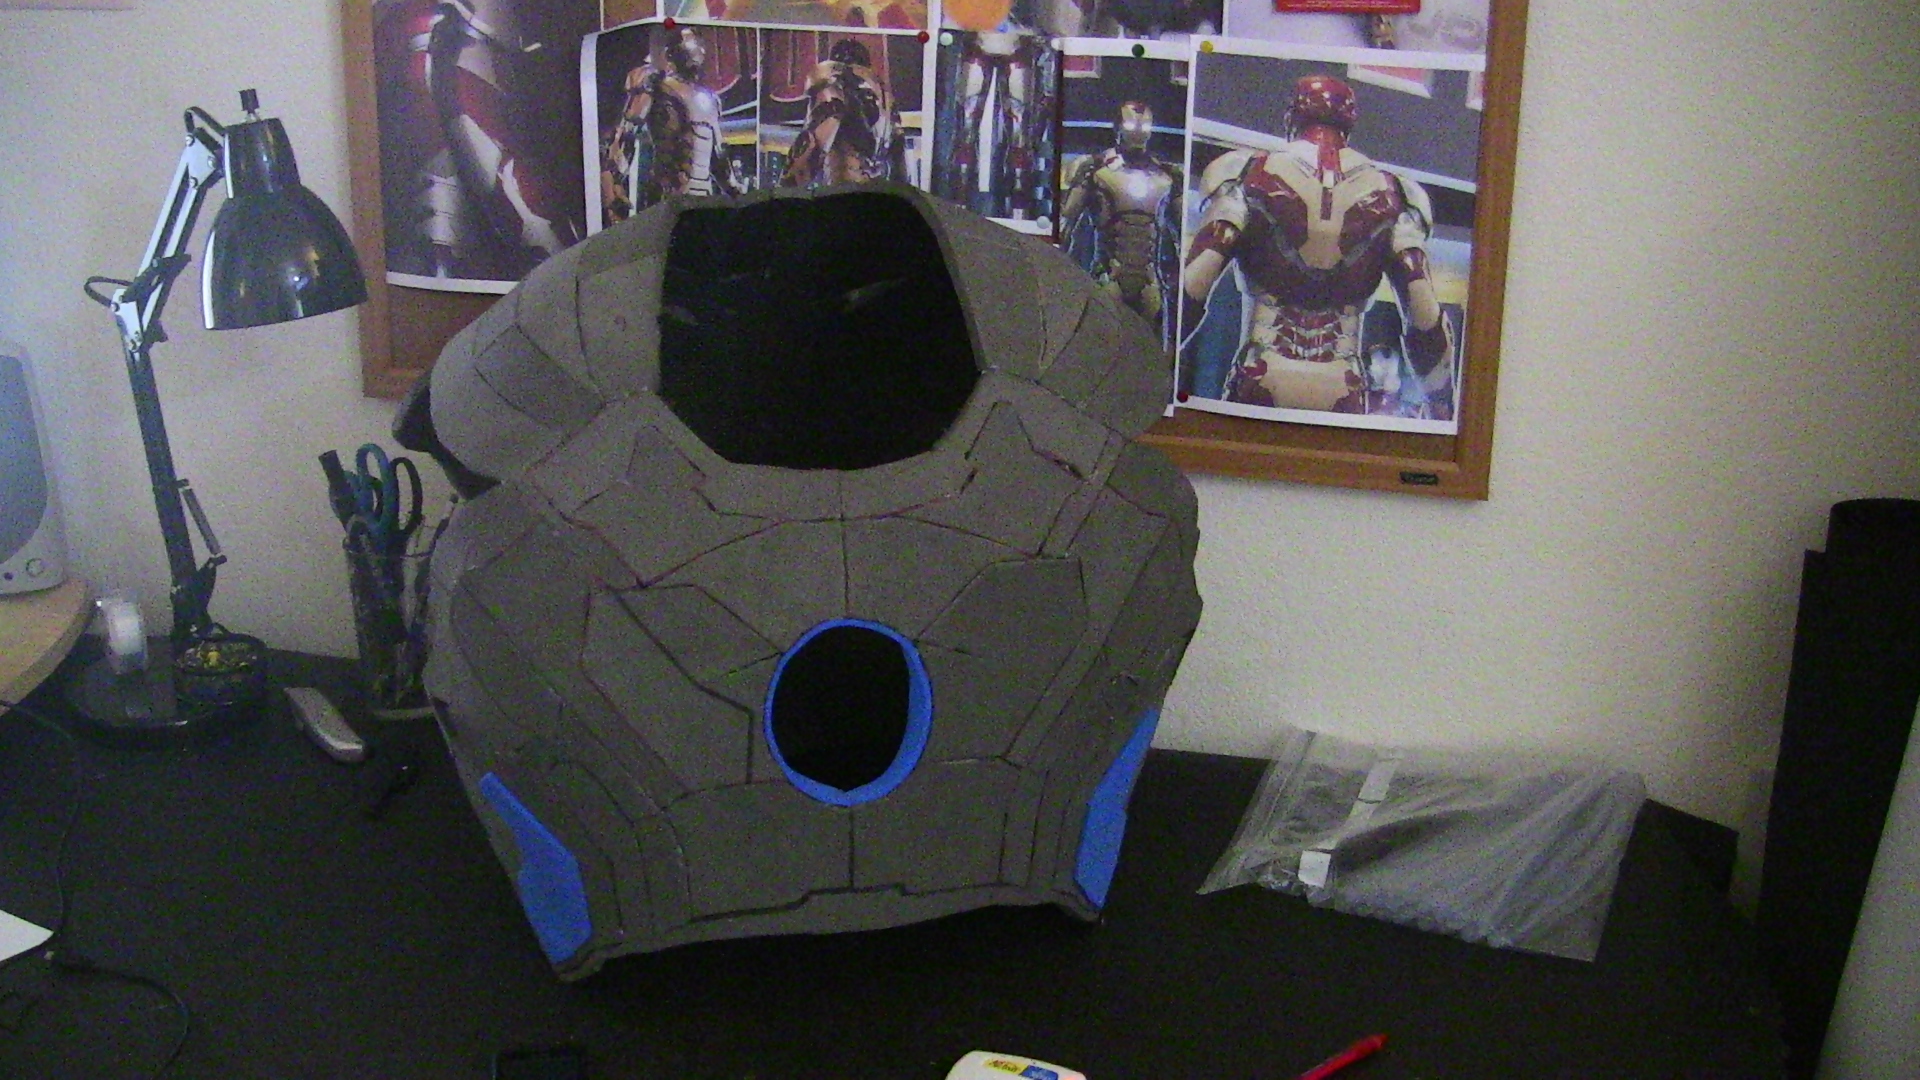 Mark 42 Chest and Back